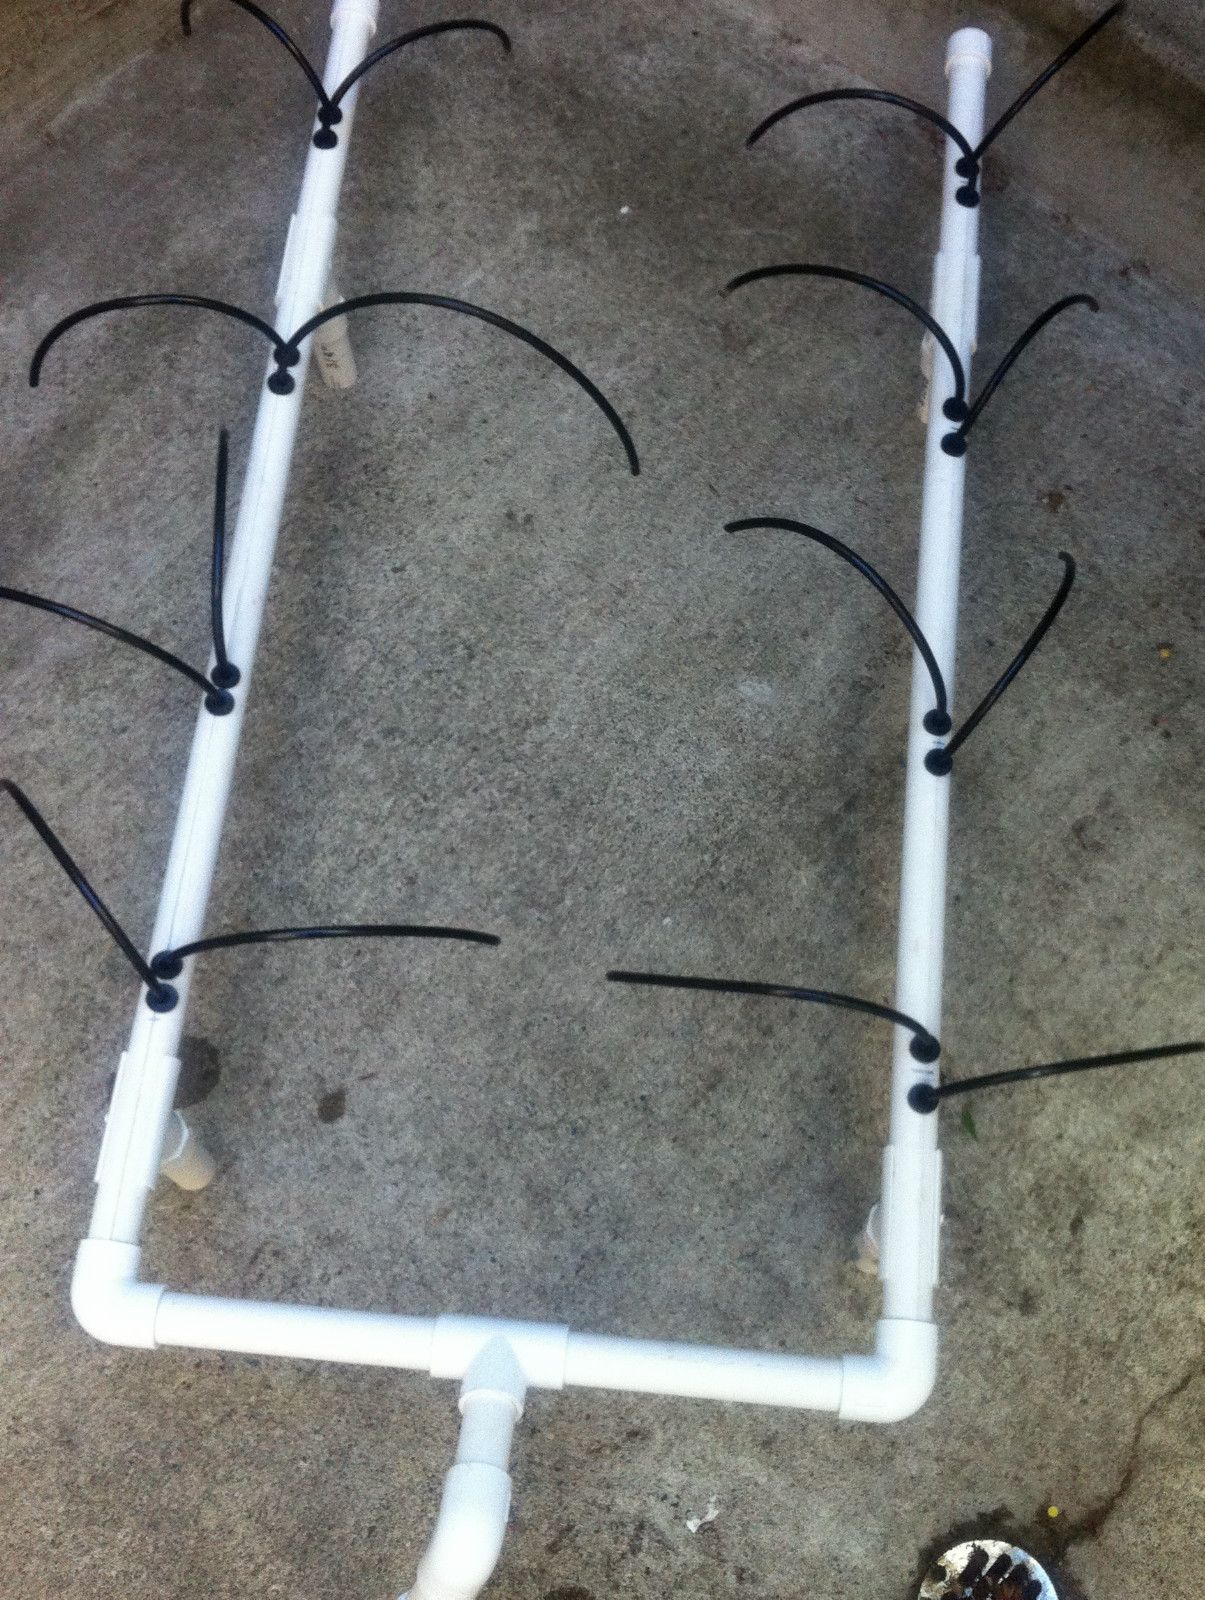  Fed Hydroponic Drip System 16 Site Covert Your 3x3 Flood Tables